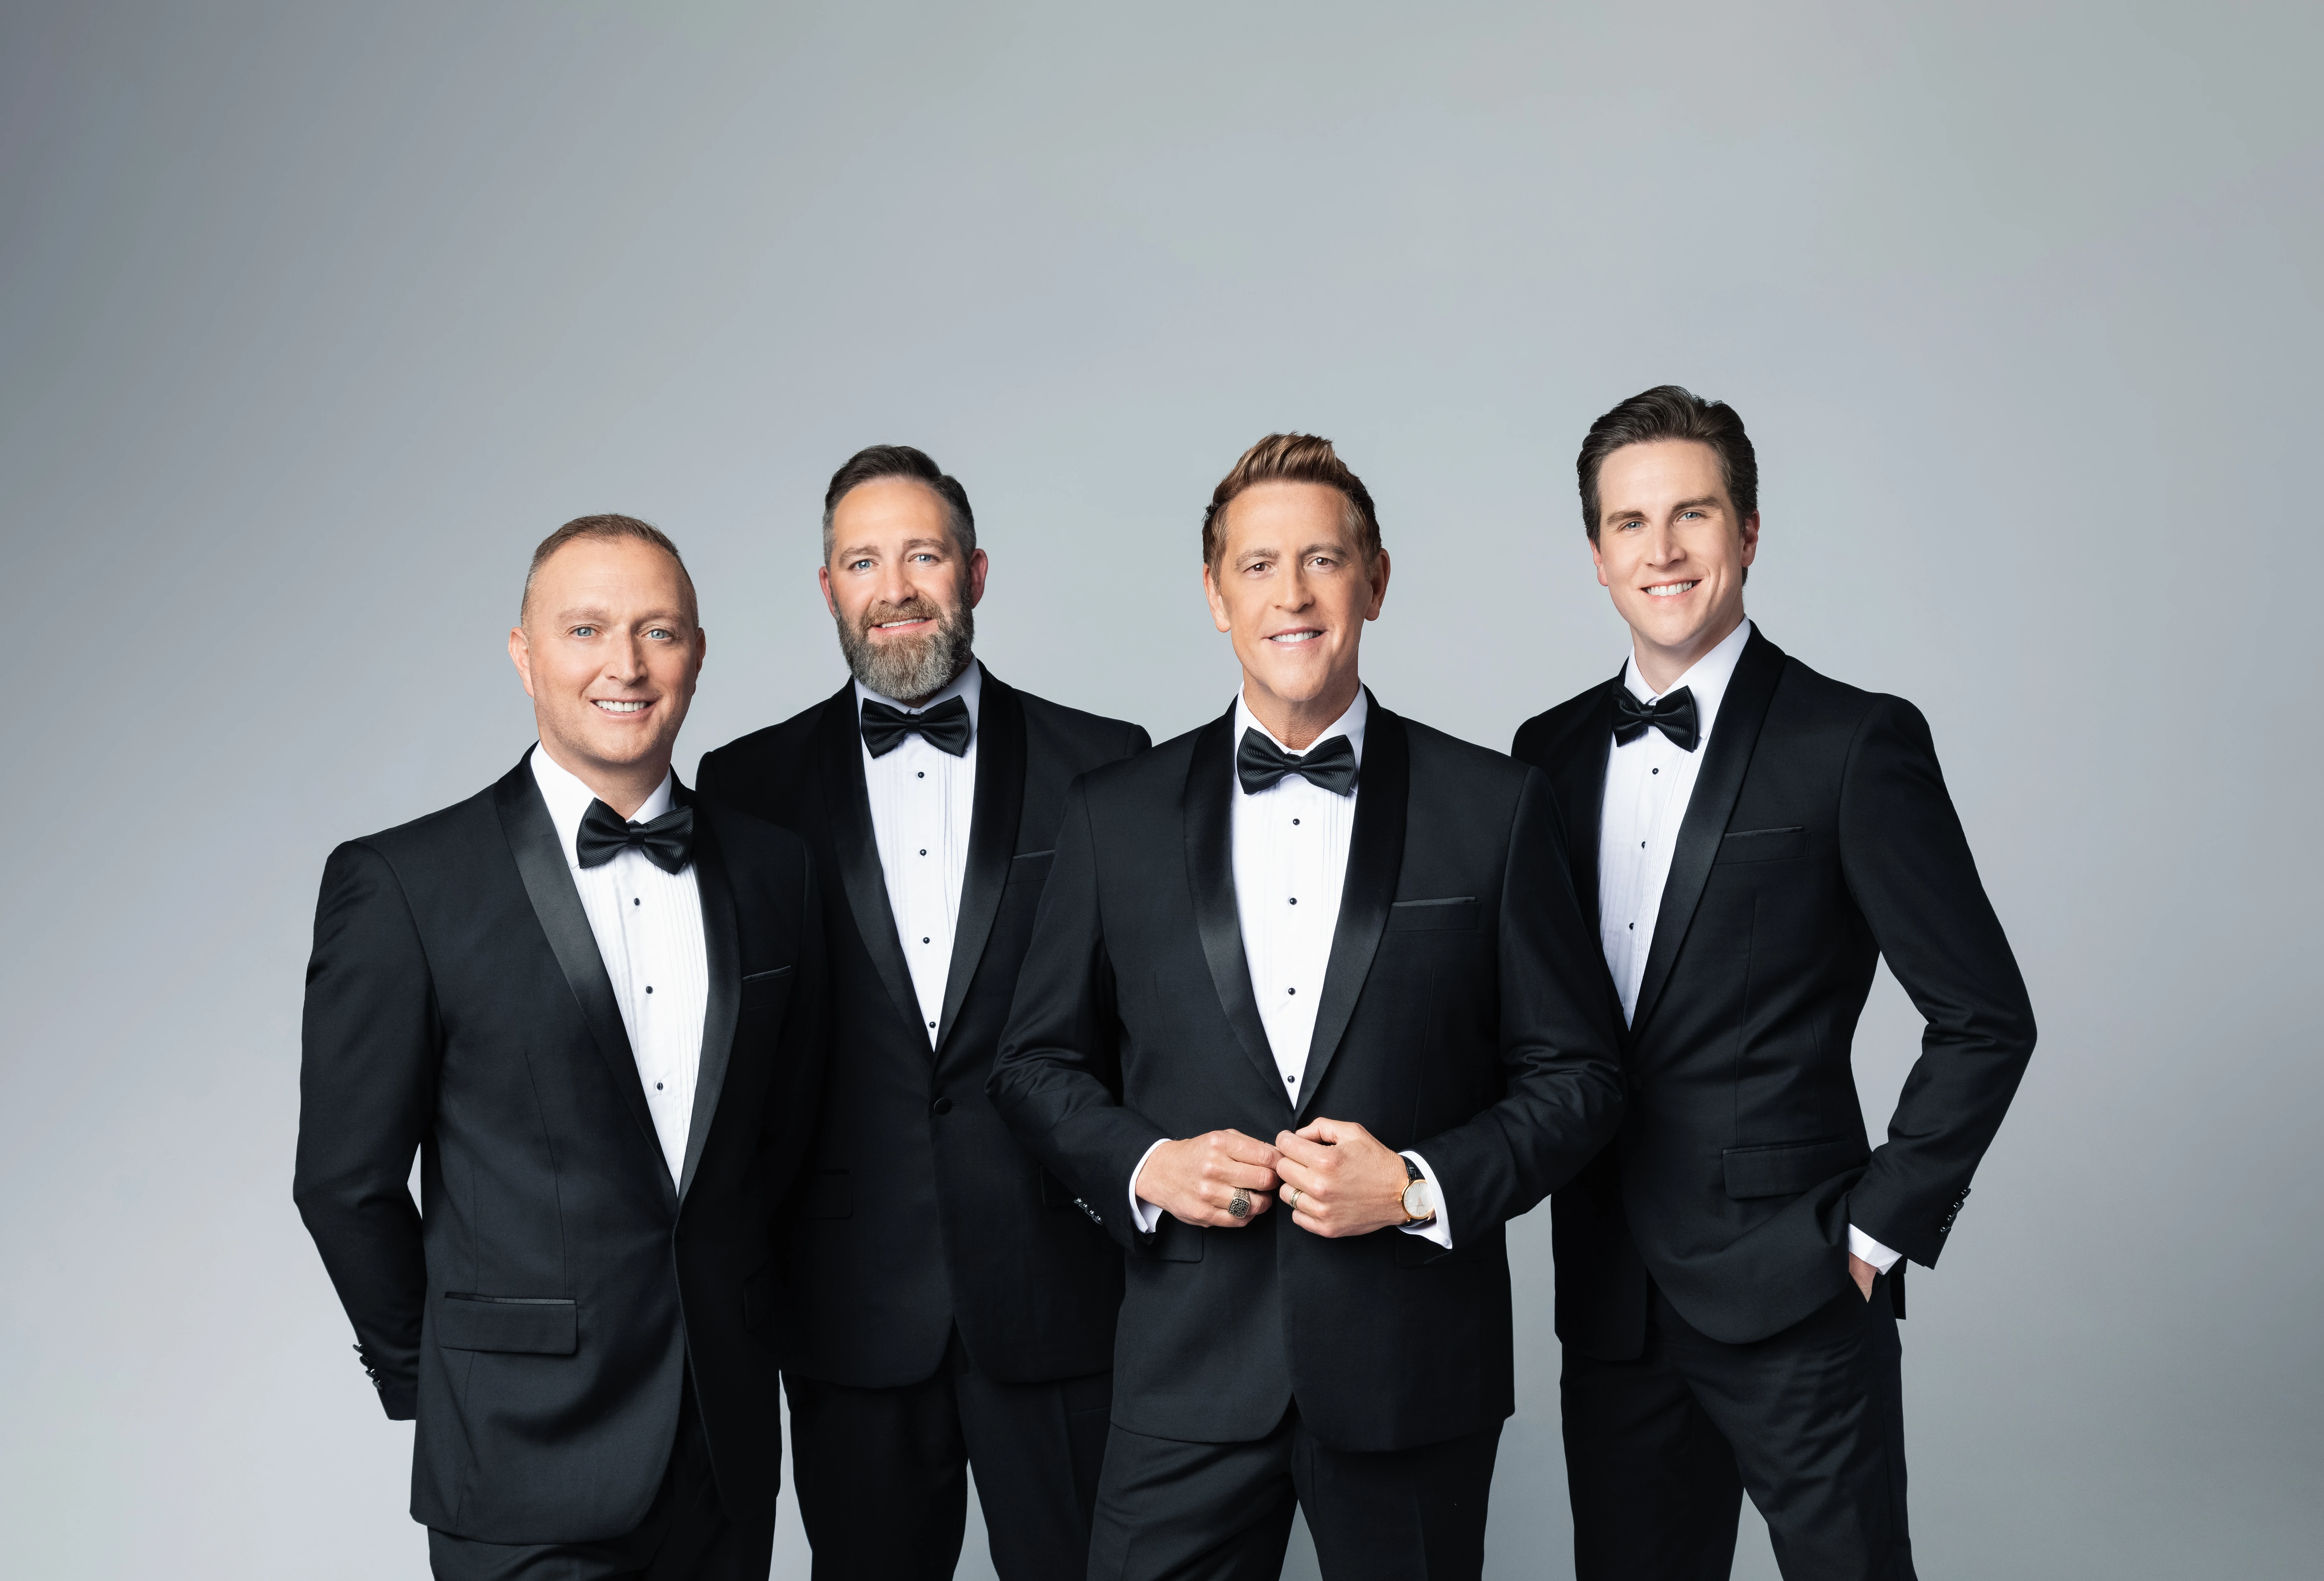 Earnie Haase and the other three members of Signature Sound posing in tuxedos